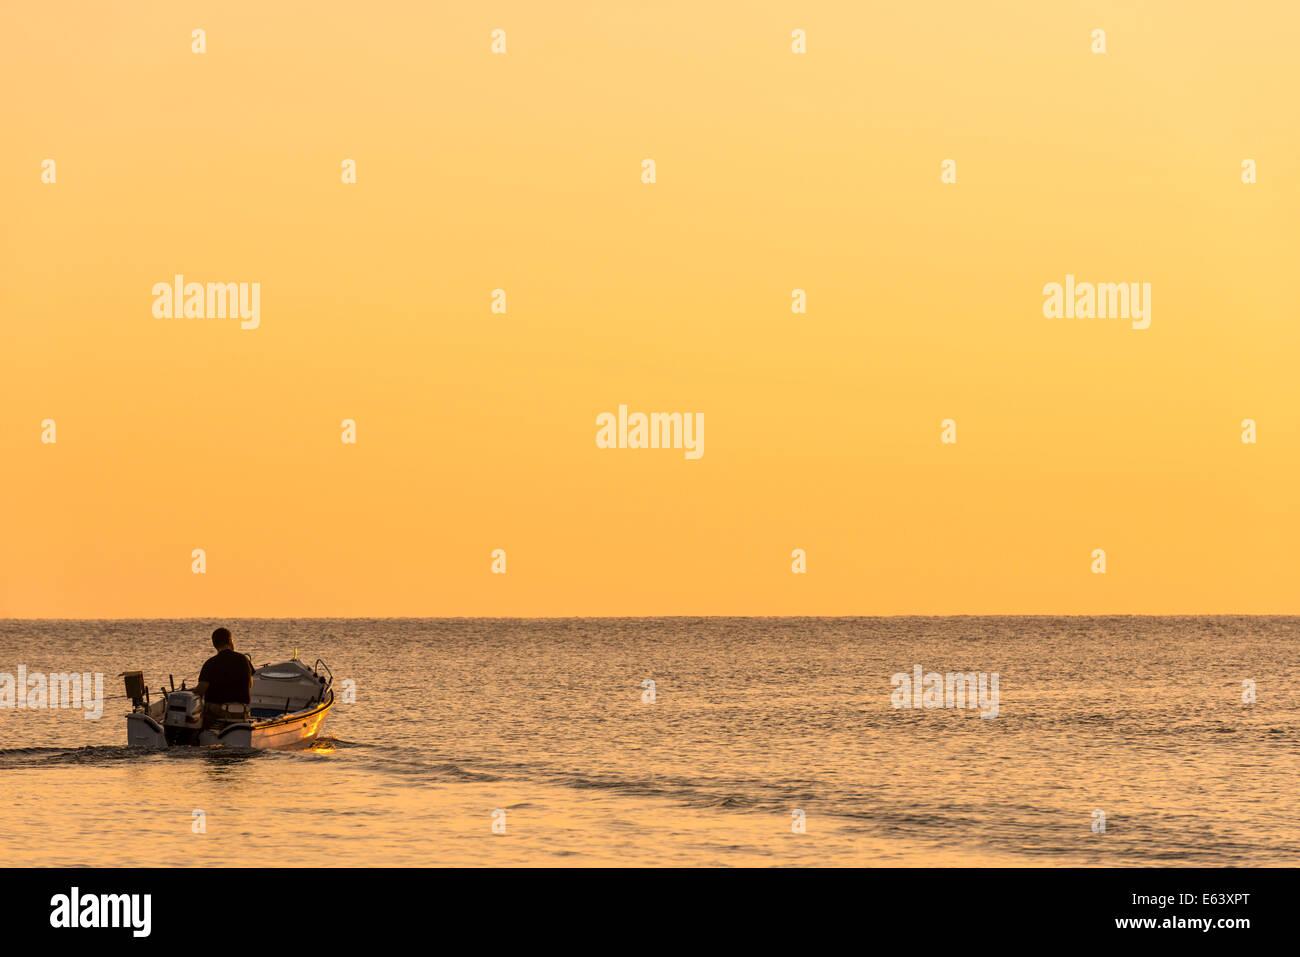 Moving Motorboat At The Mediterranean Sea in Crete, Greece Stock Photo